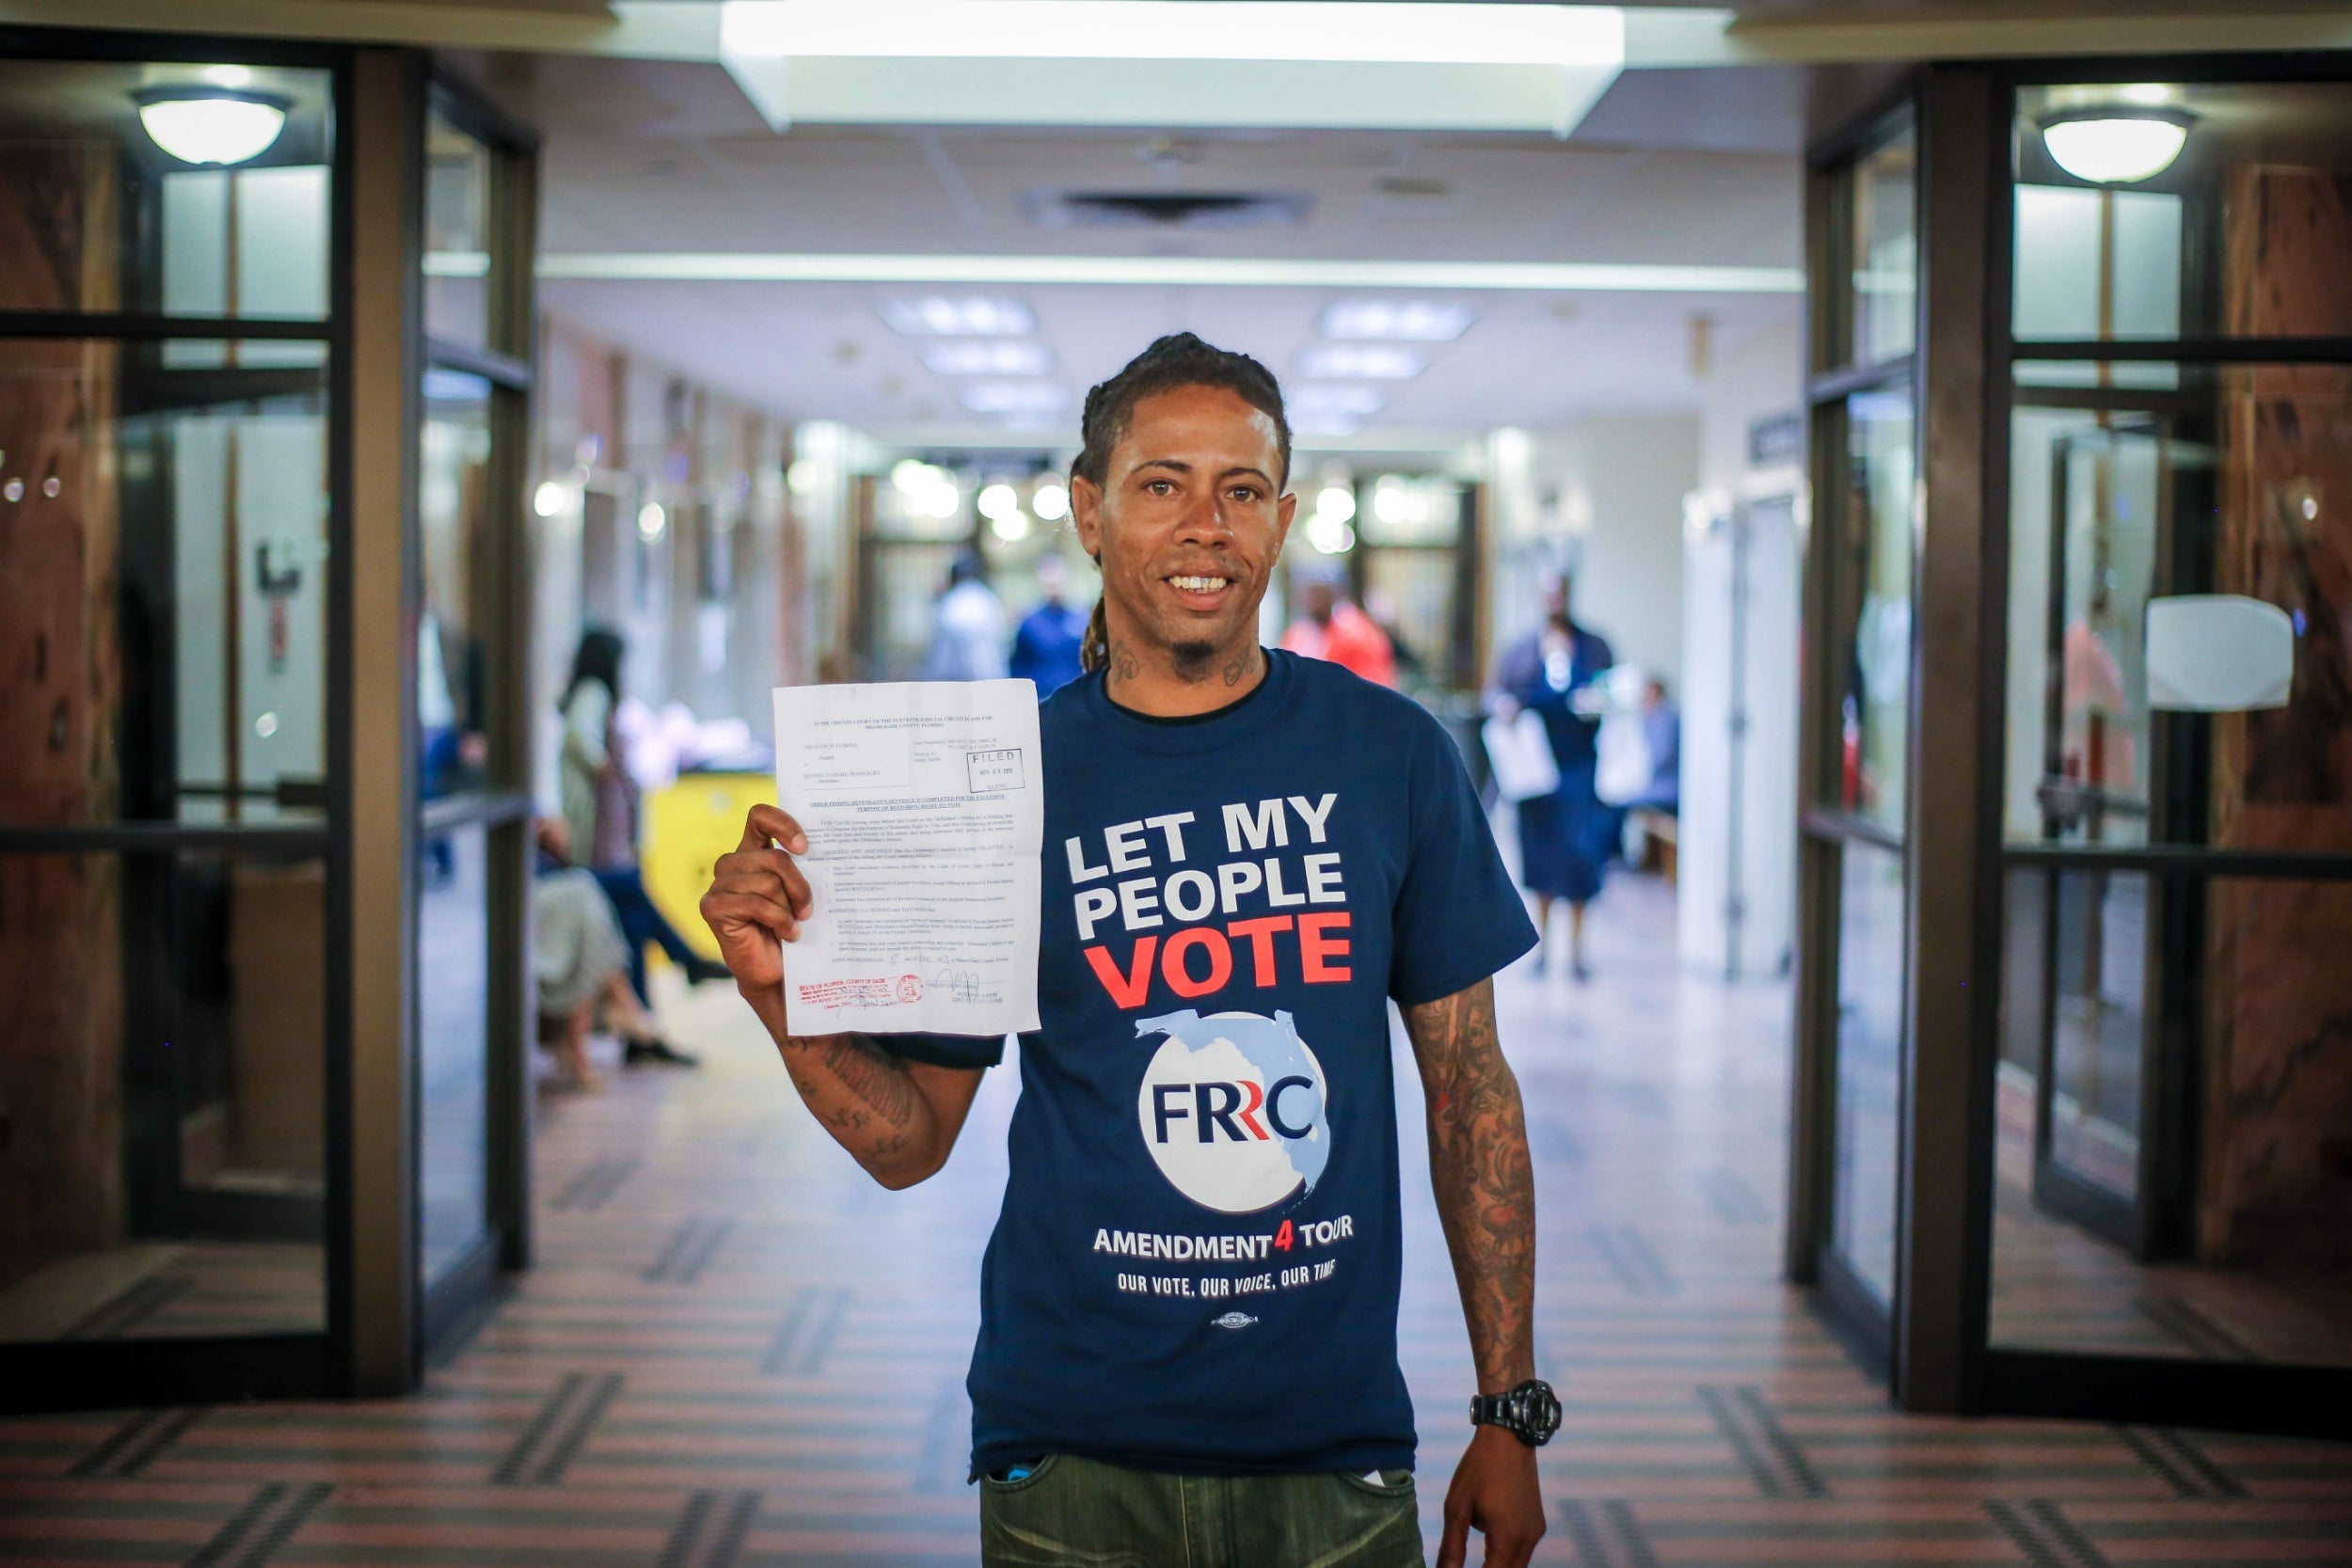 Michael Monfluery, a 38-year-old who has never been eligible to vote, shows off a certificate restoring his right after the special court hearing in Miami, Florida last month